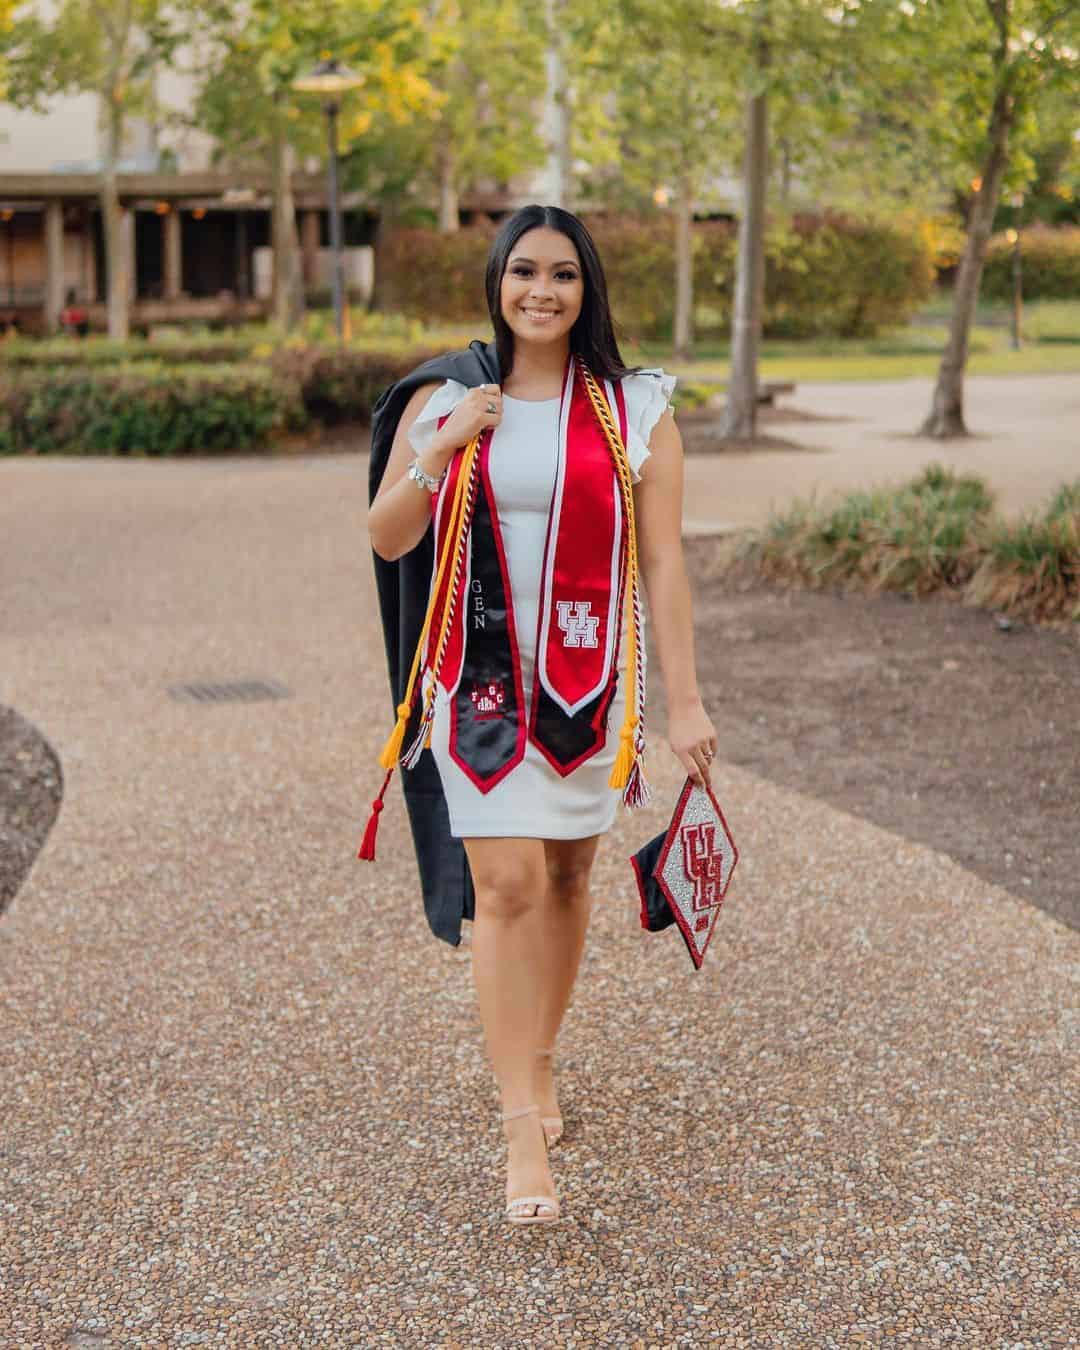 45 Hottest College Graduation Dresses That Will Make You Stand Out From The Crowd With Houna